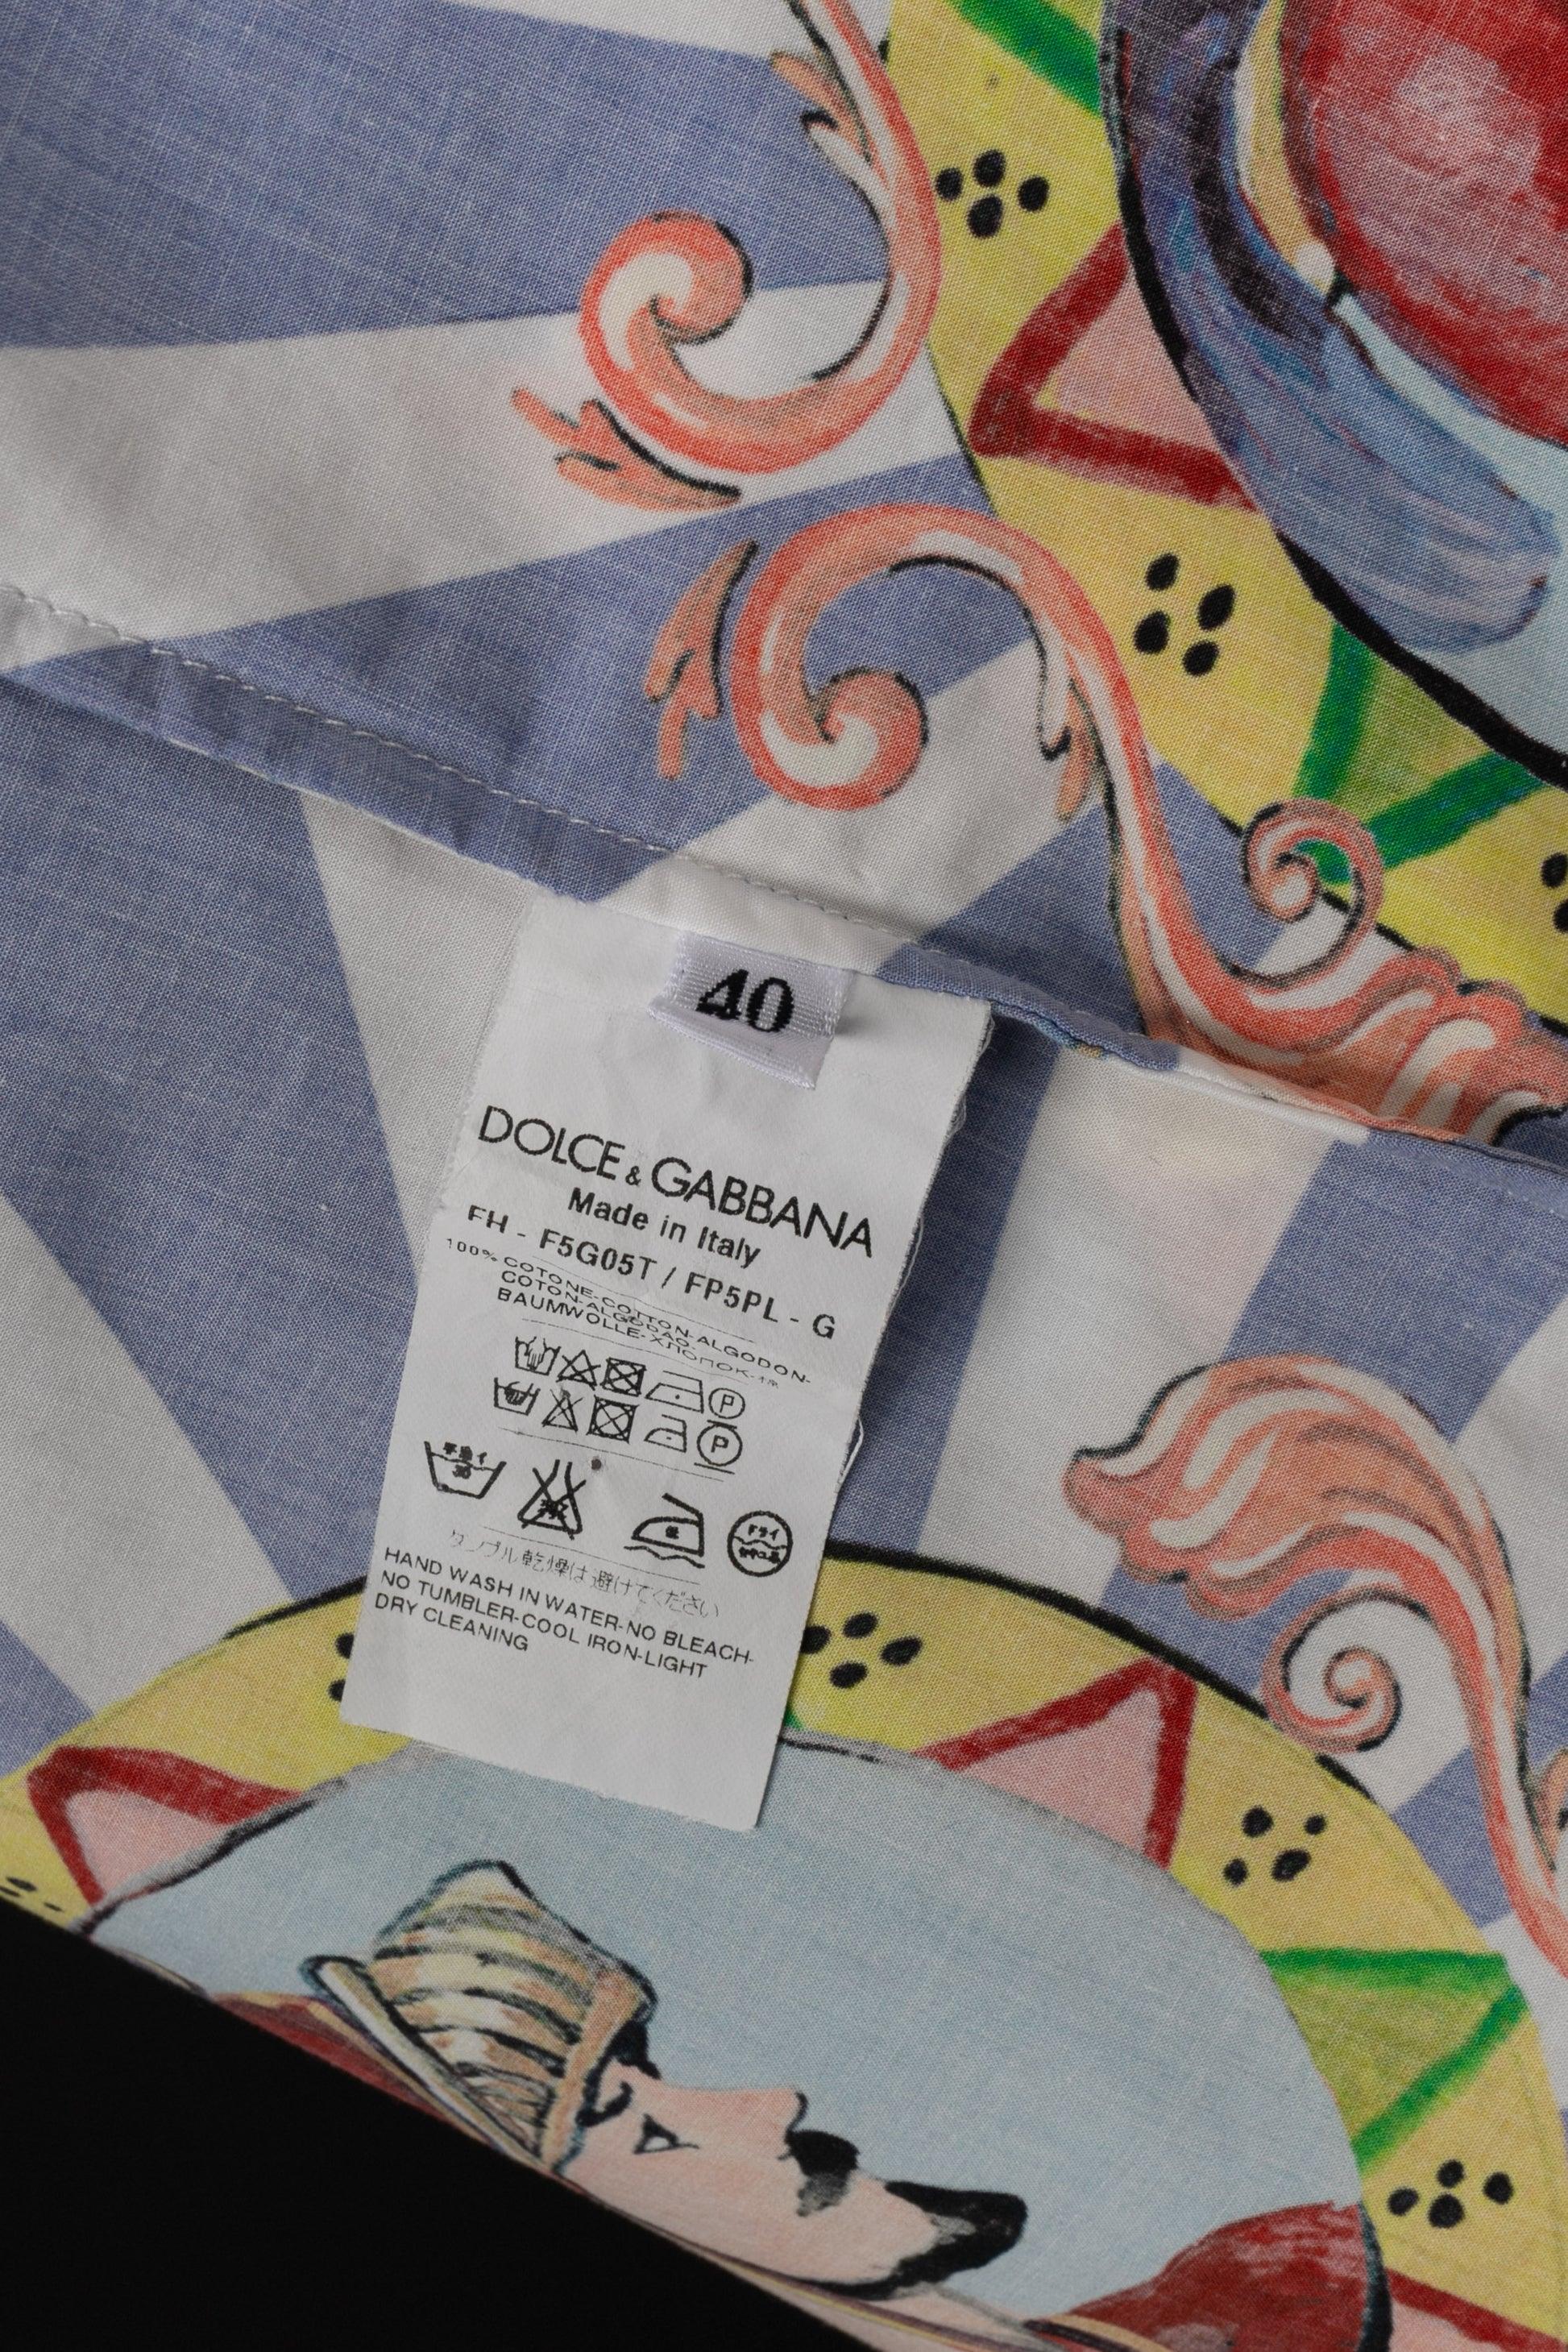 Dolce & Gabbana Multicolored Printed Ccotton Shirt, 2016 For Sale 3